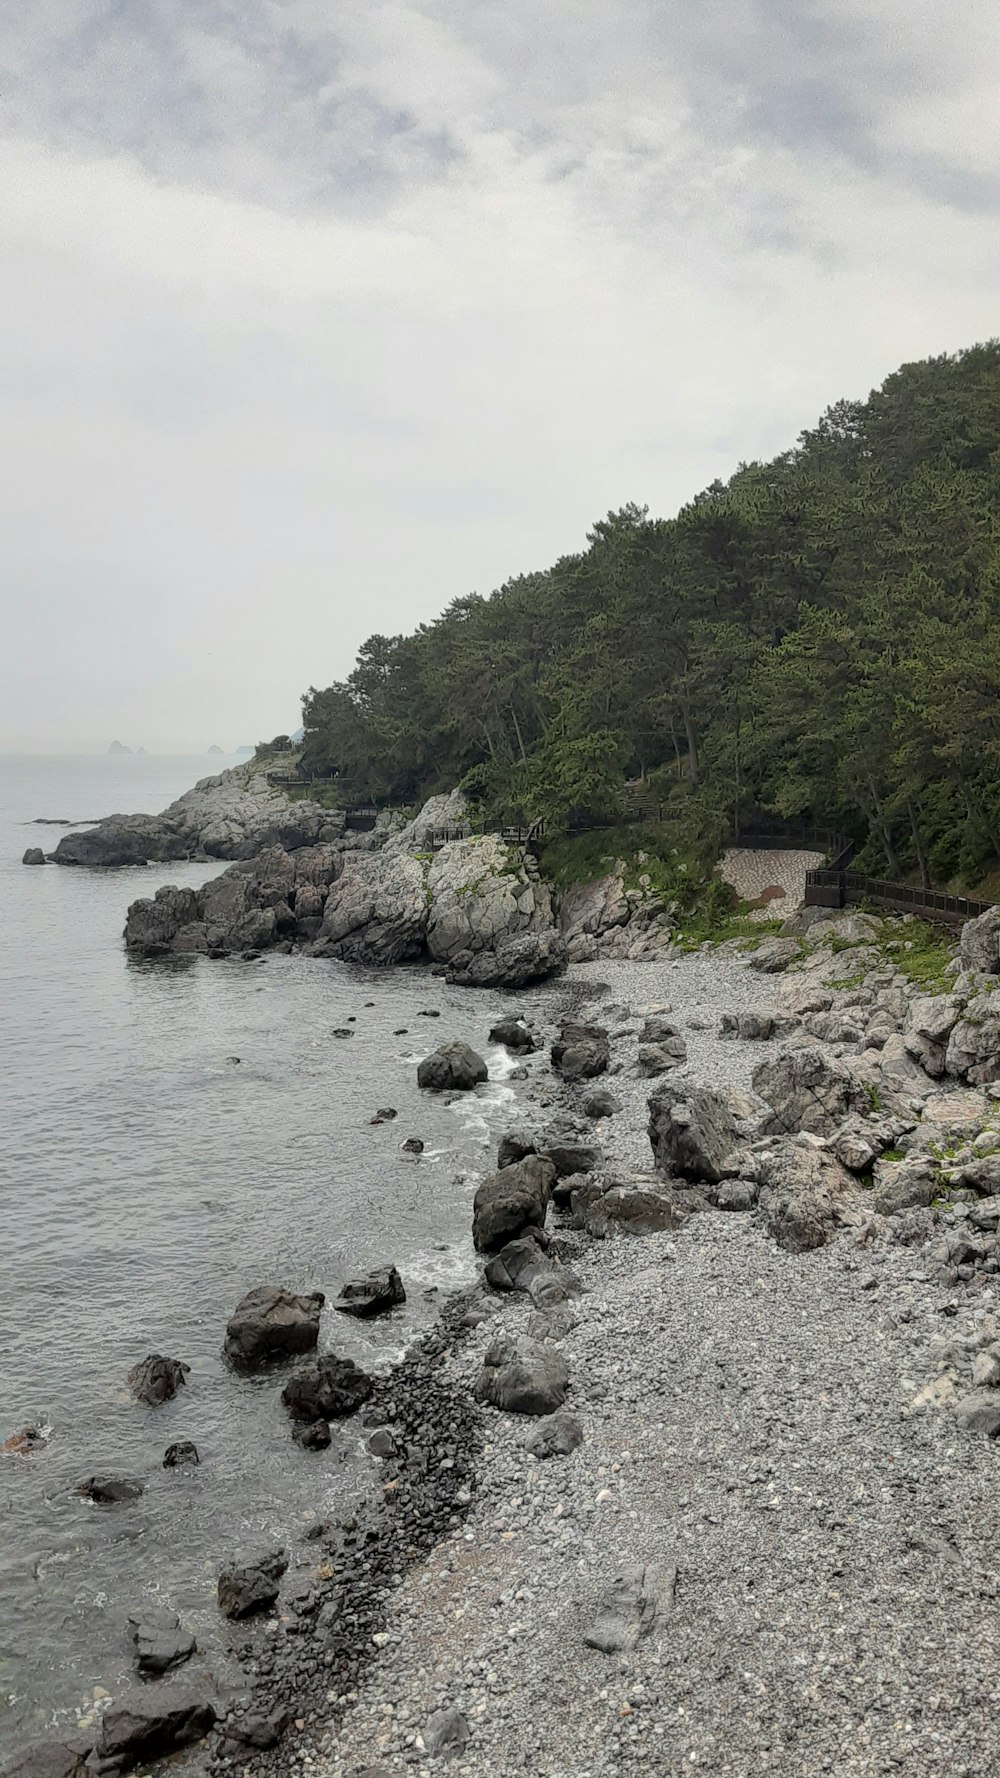 a view of a rocky beach with trees in the background